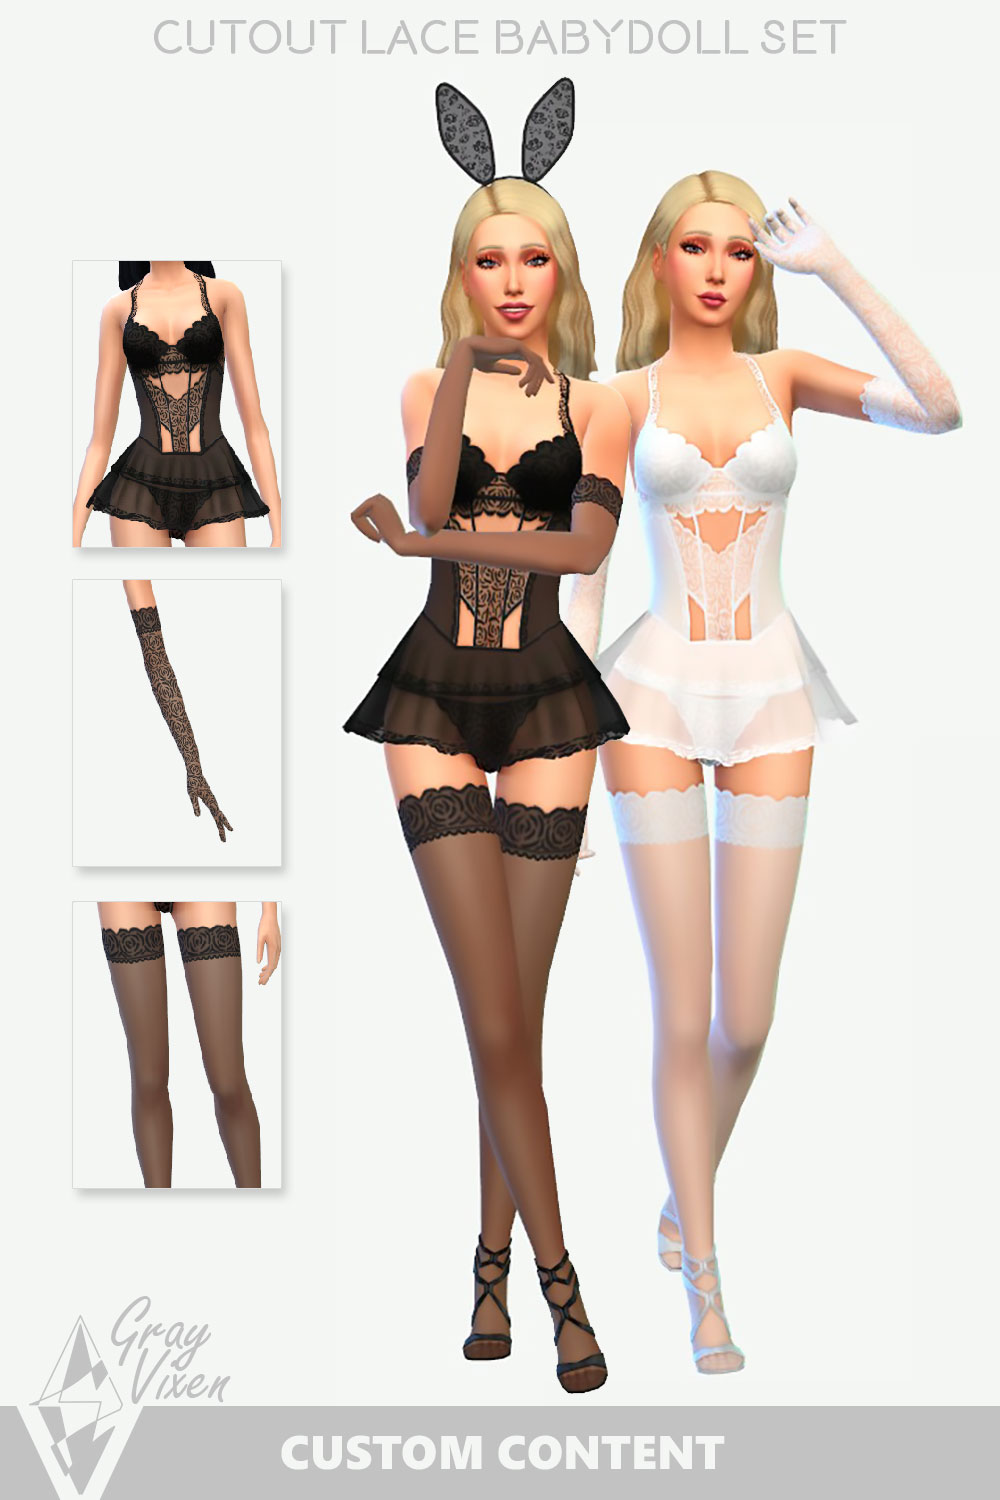 The Sims 4 Cutout Lace Babydoll Set Custom Content